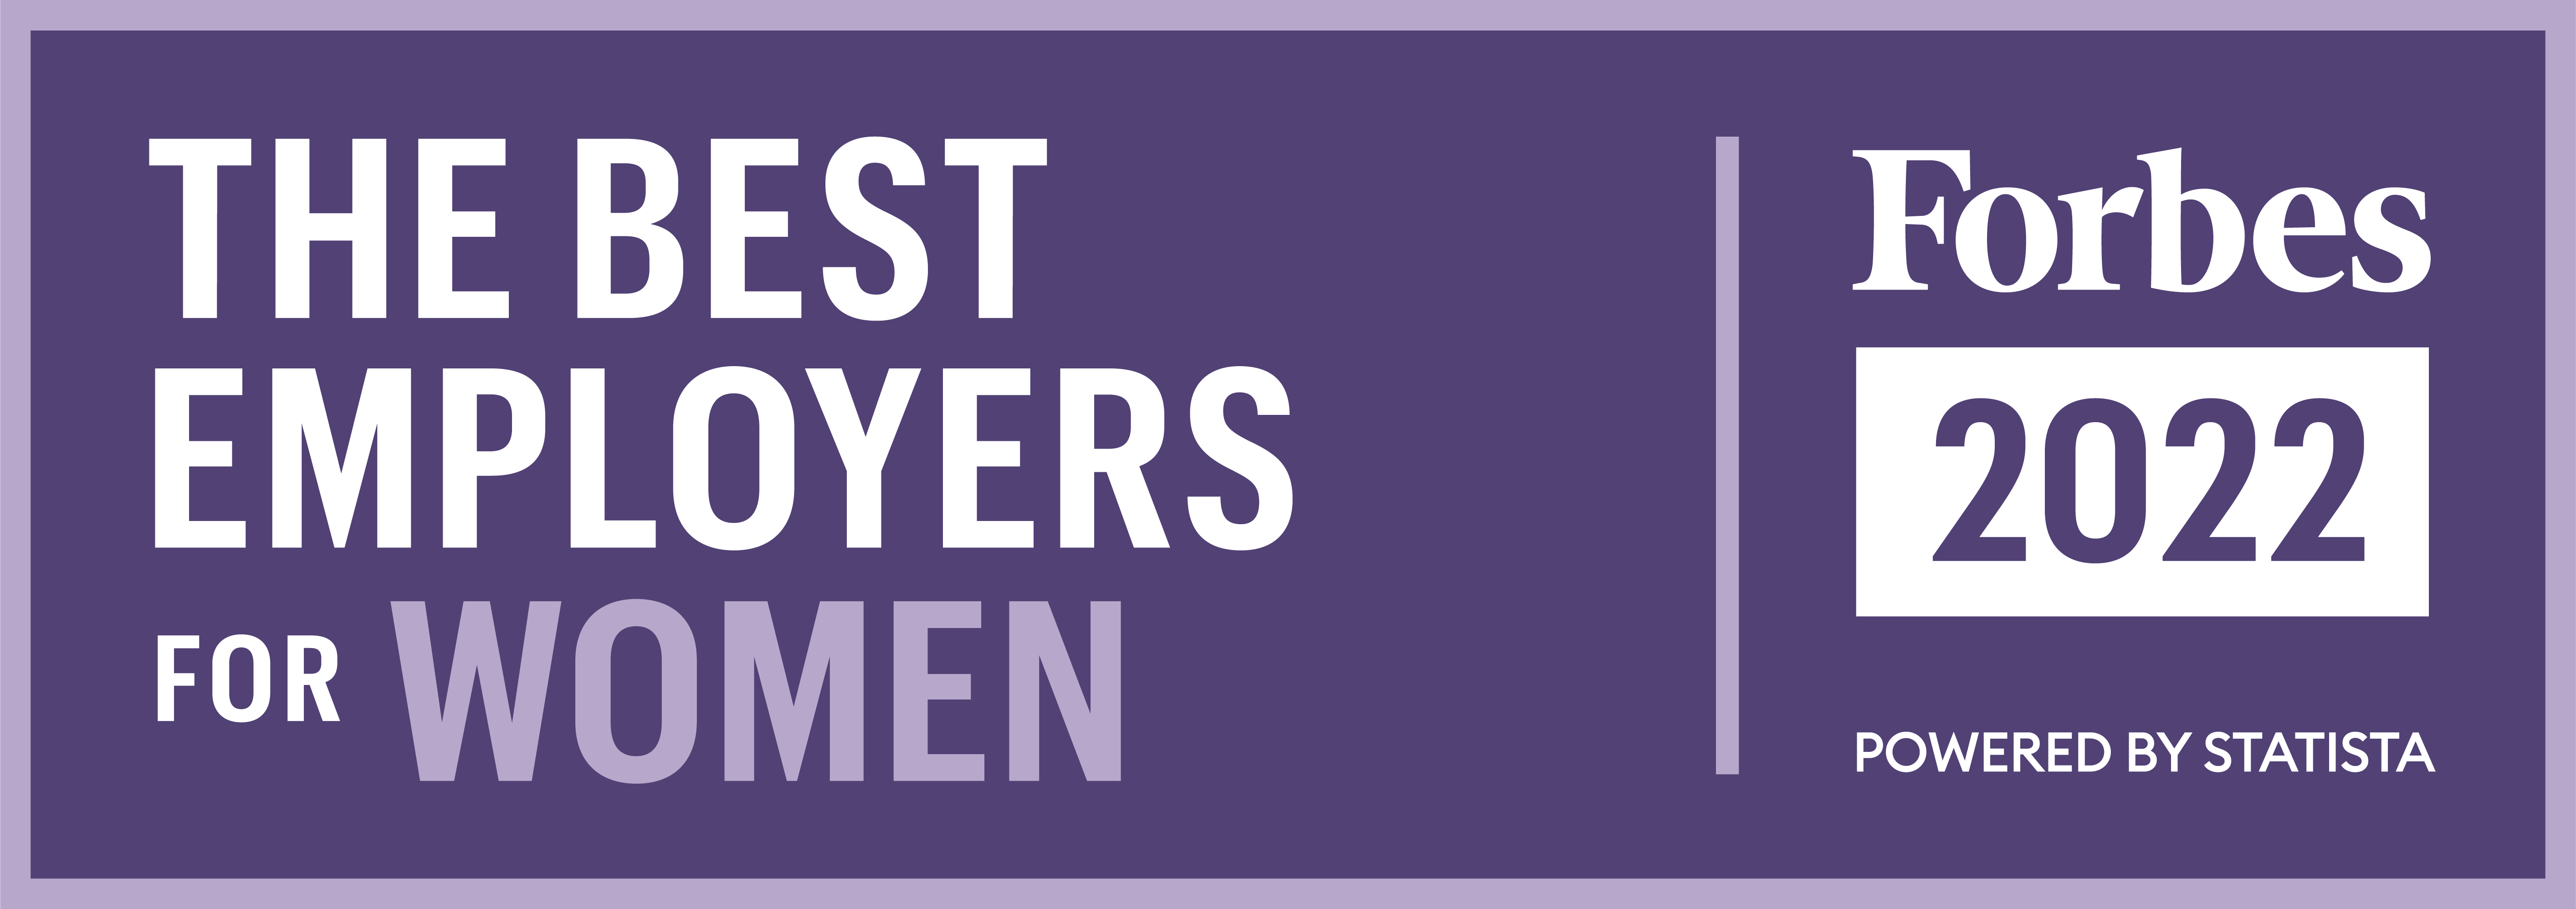 Forbes: The Best Employers for Women